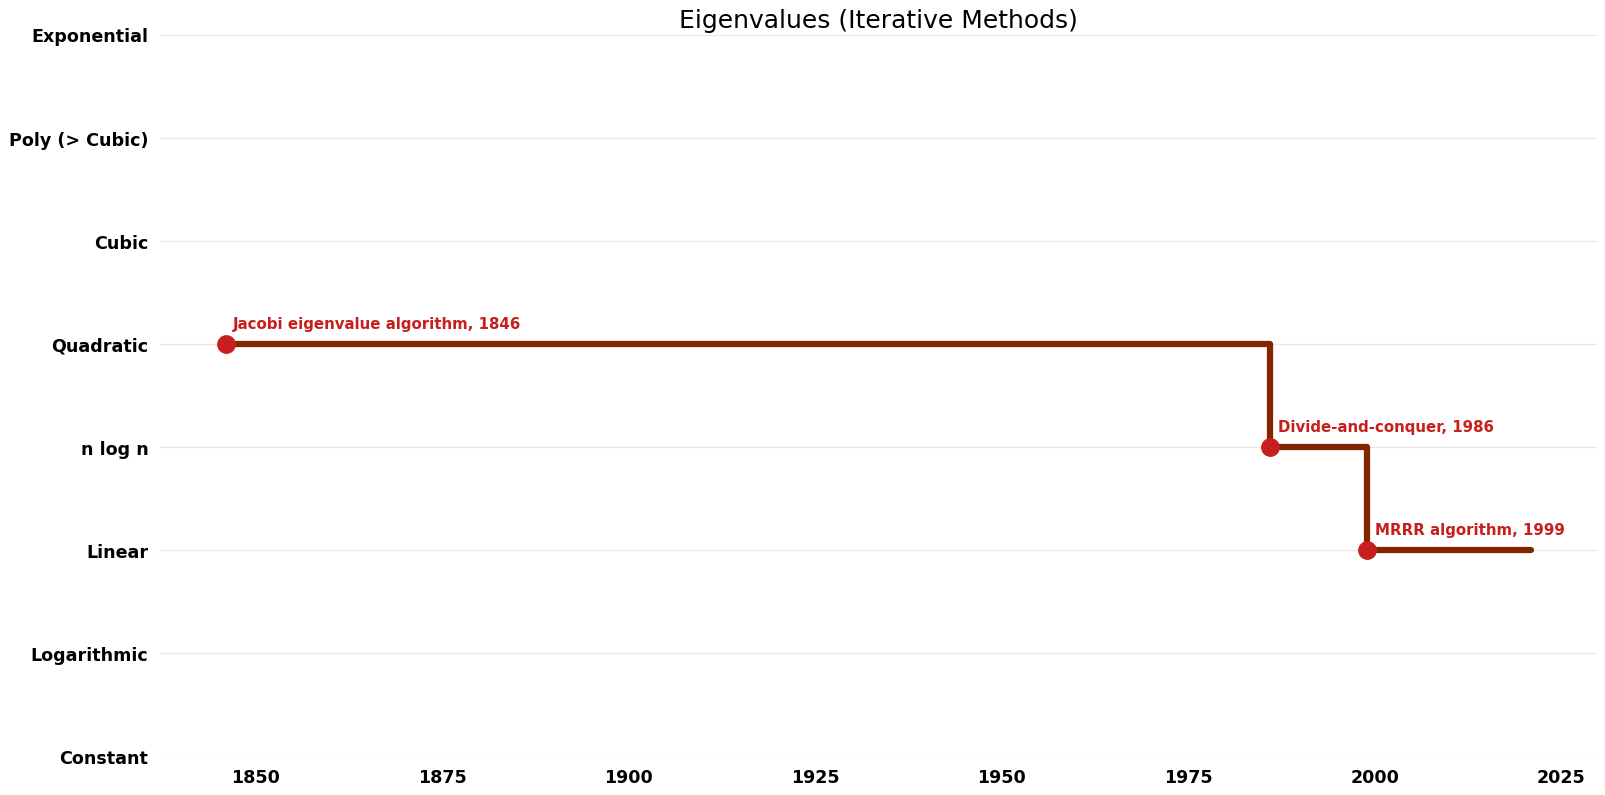 Eigenvalues (Iterative Methods) - Time.png